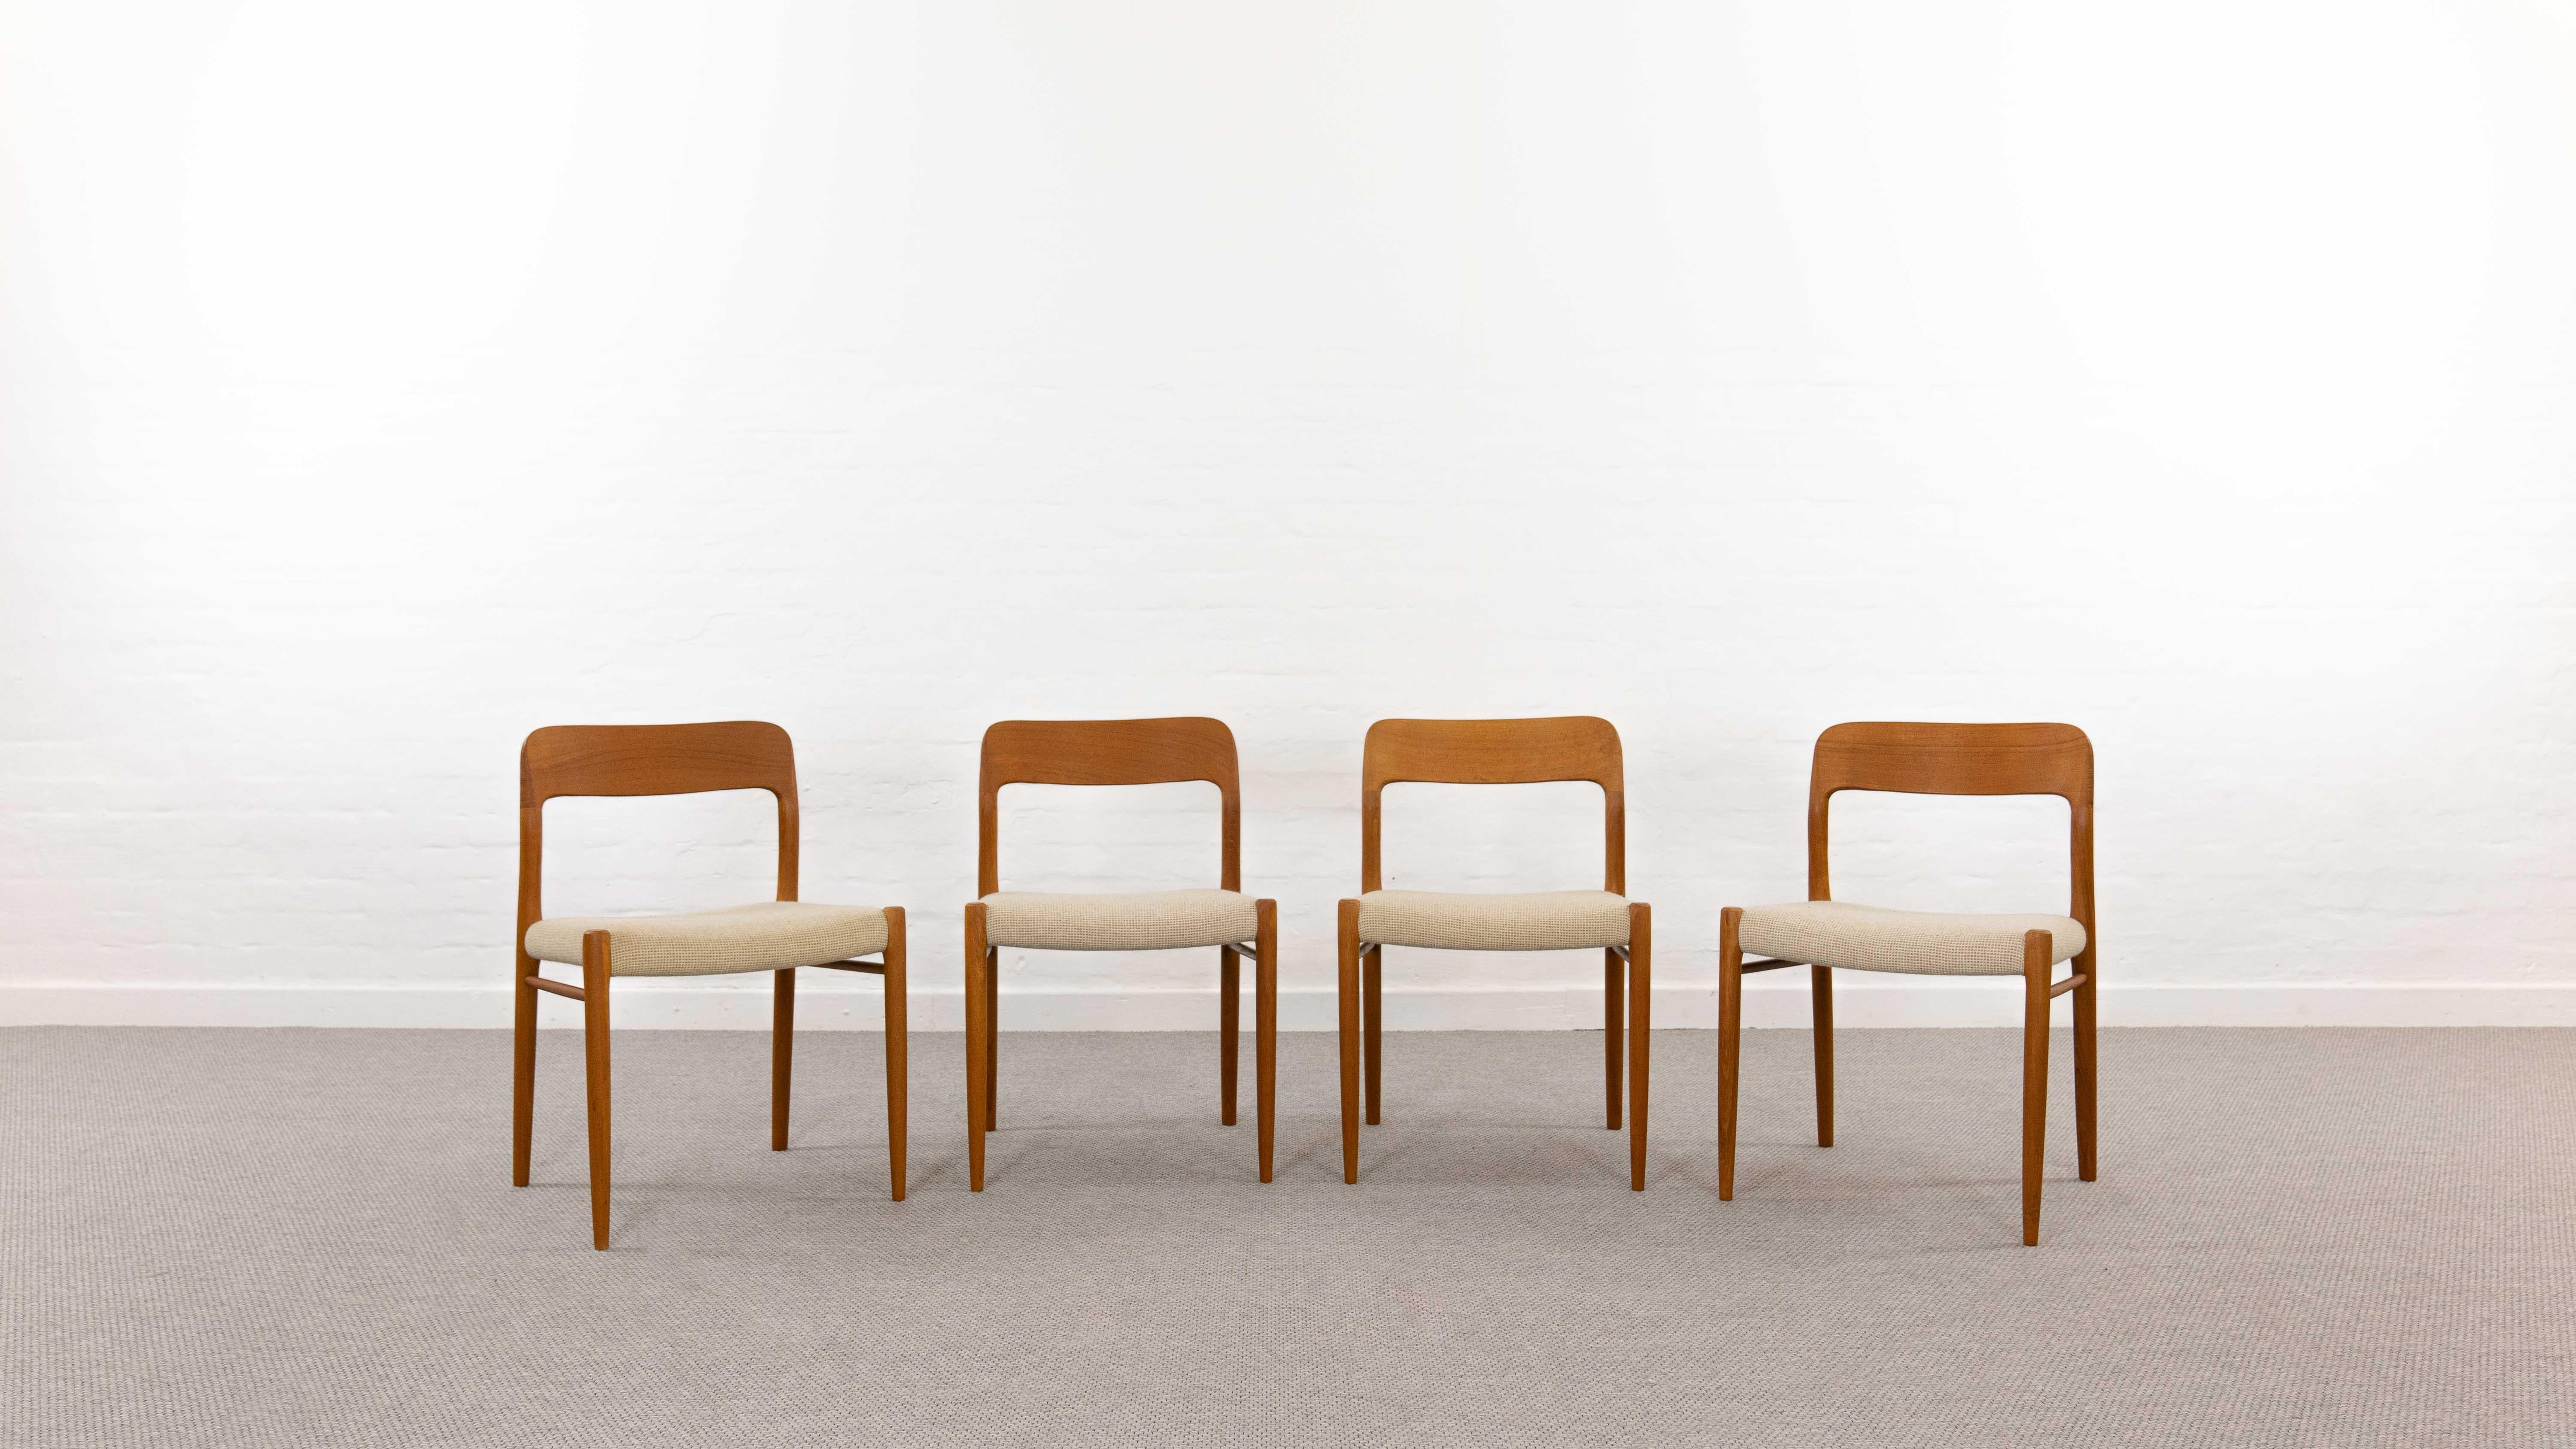 Set 4 mid century scaninavian teakchairs, designed by Niels Otto Möller 1954, manufactured by J.L. Möller – Höjbjerg, Denmark. Model No. 75. Teakwoodframe upholstered with original beige fabrics. All chairs are marked underneath with paperlabel.